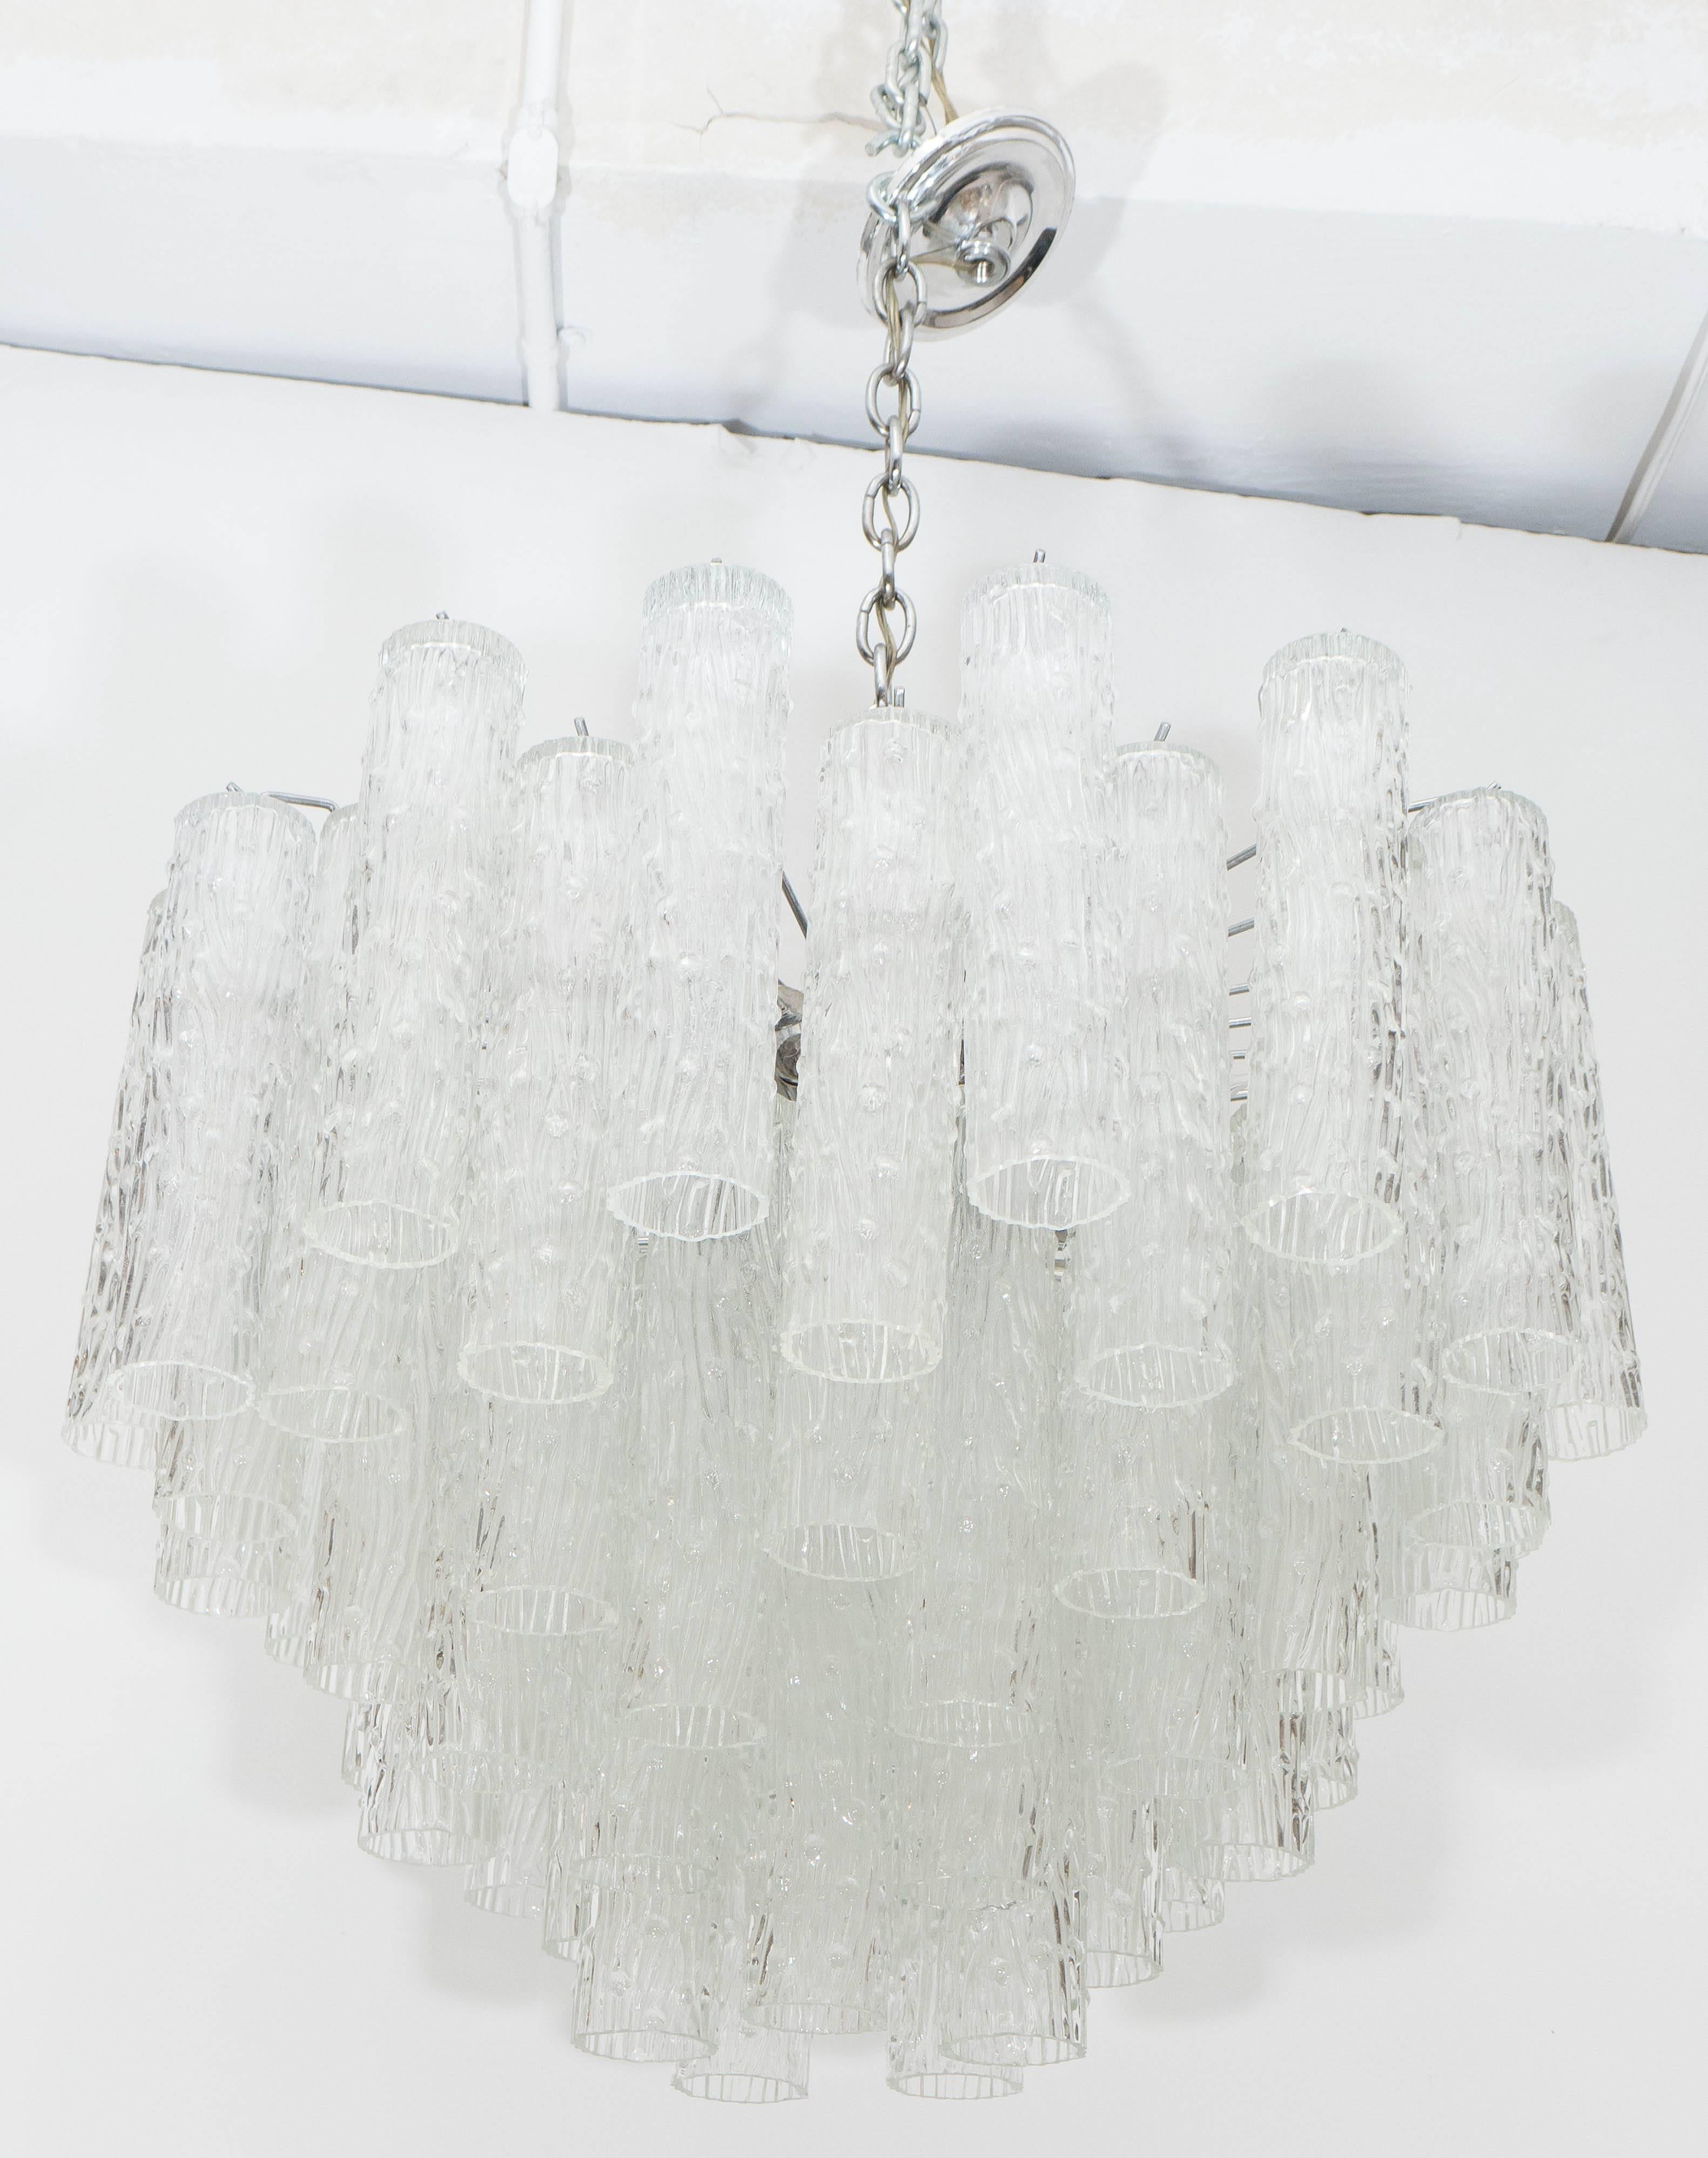 A vintage highly modernistic chandelier, produced circa 1960s-1970s, surrounded by staggered textured glass tube prisms, suspended from a chrome frame. Requires 16 candelabra base bulbs. Very good condition, consistent with age and use; dimensions